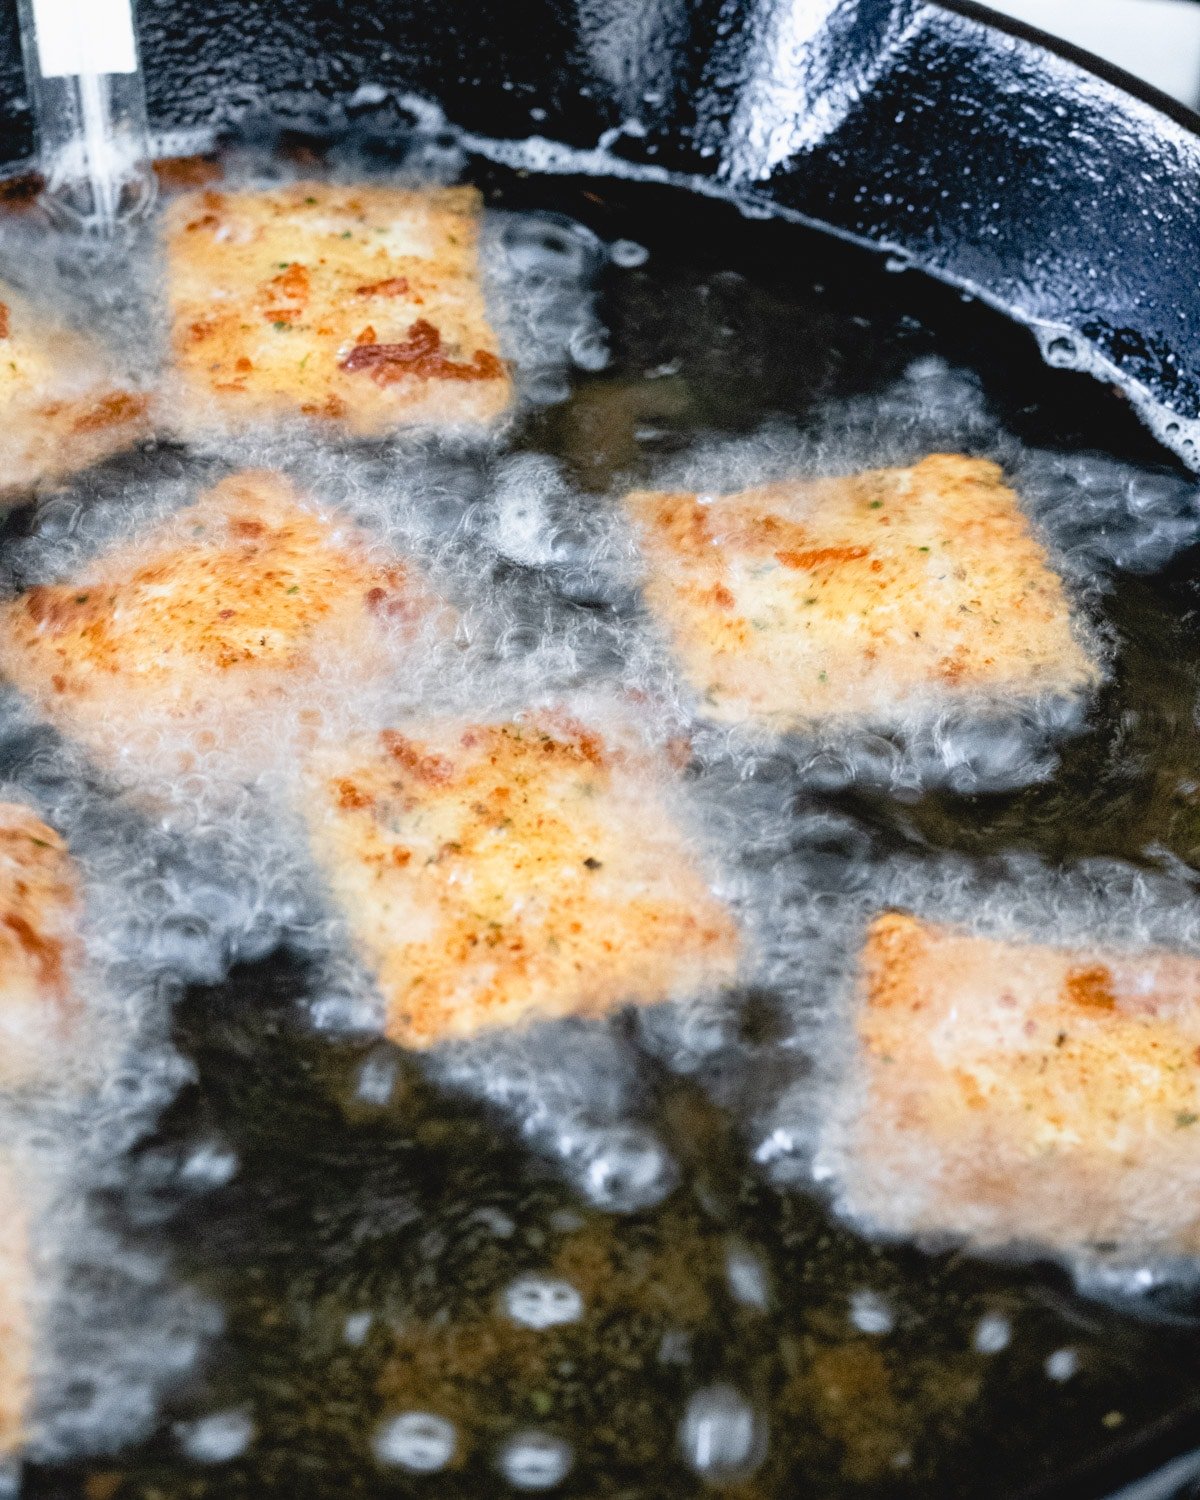 Breaded ravioli being deep fried in a cast iron skillet.